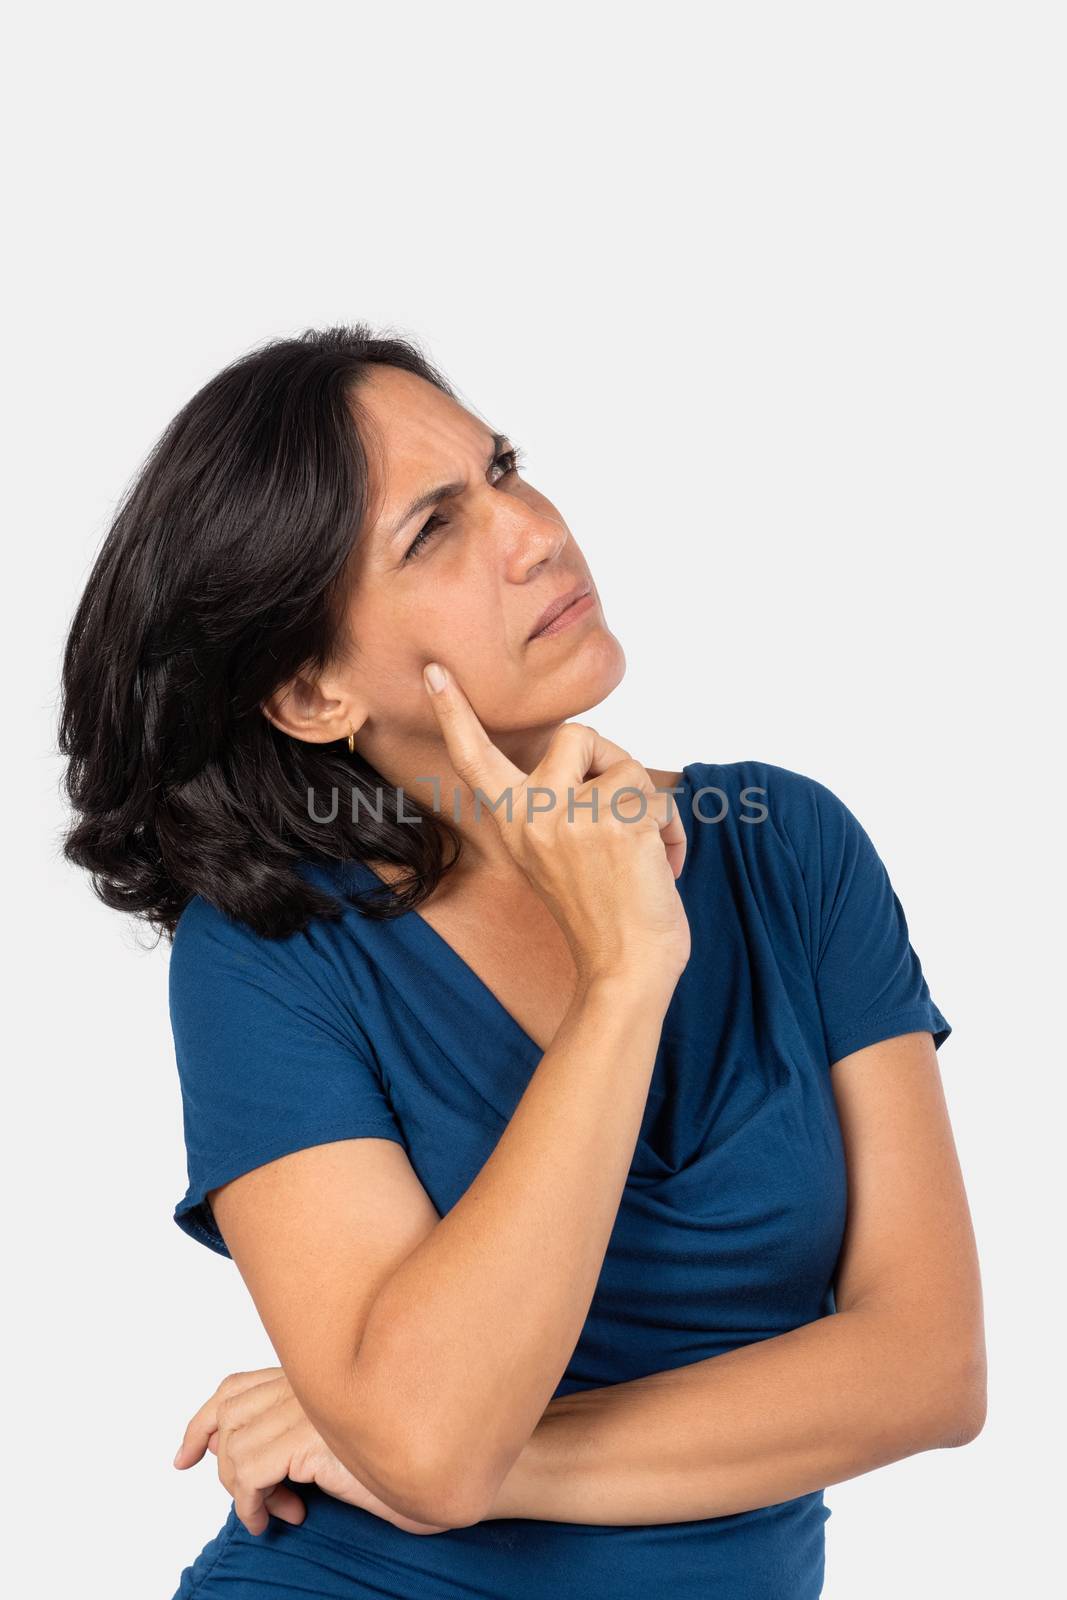 A woman thinking,with one finger touching her face, she is wearing a blue blouse